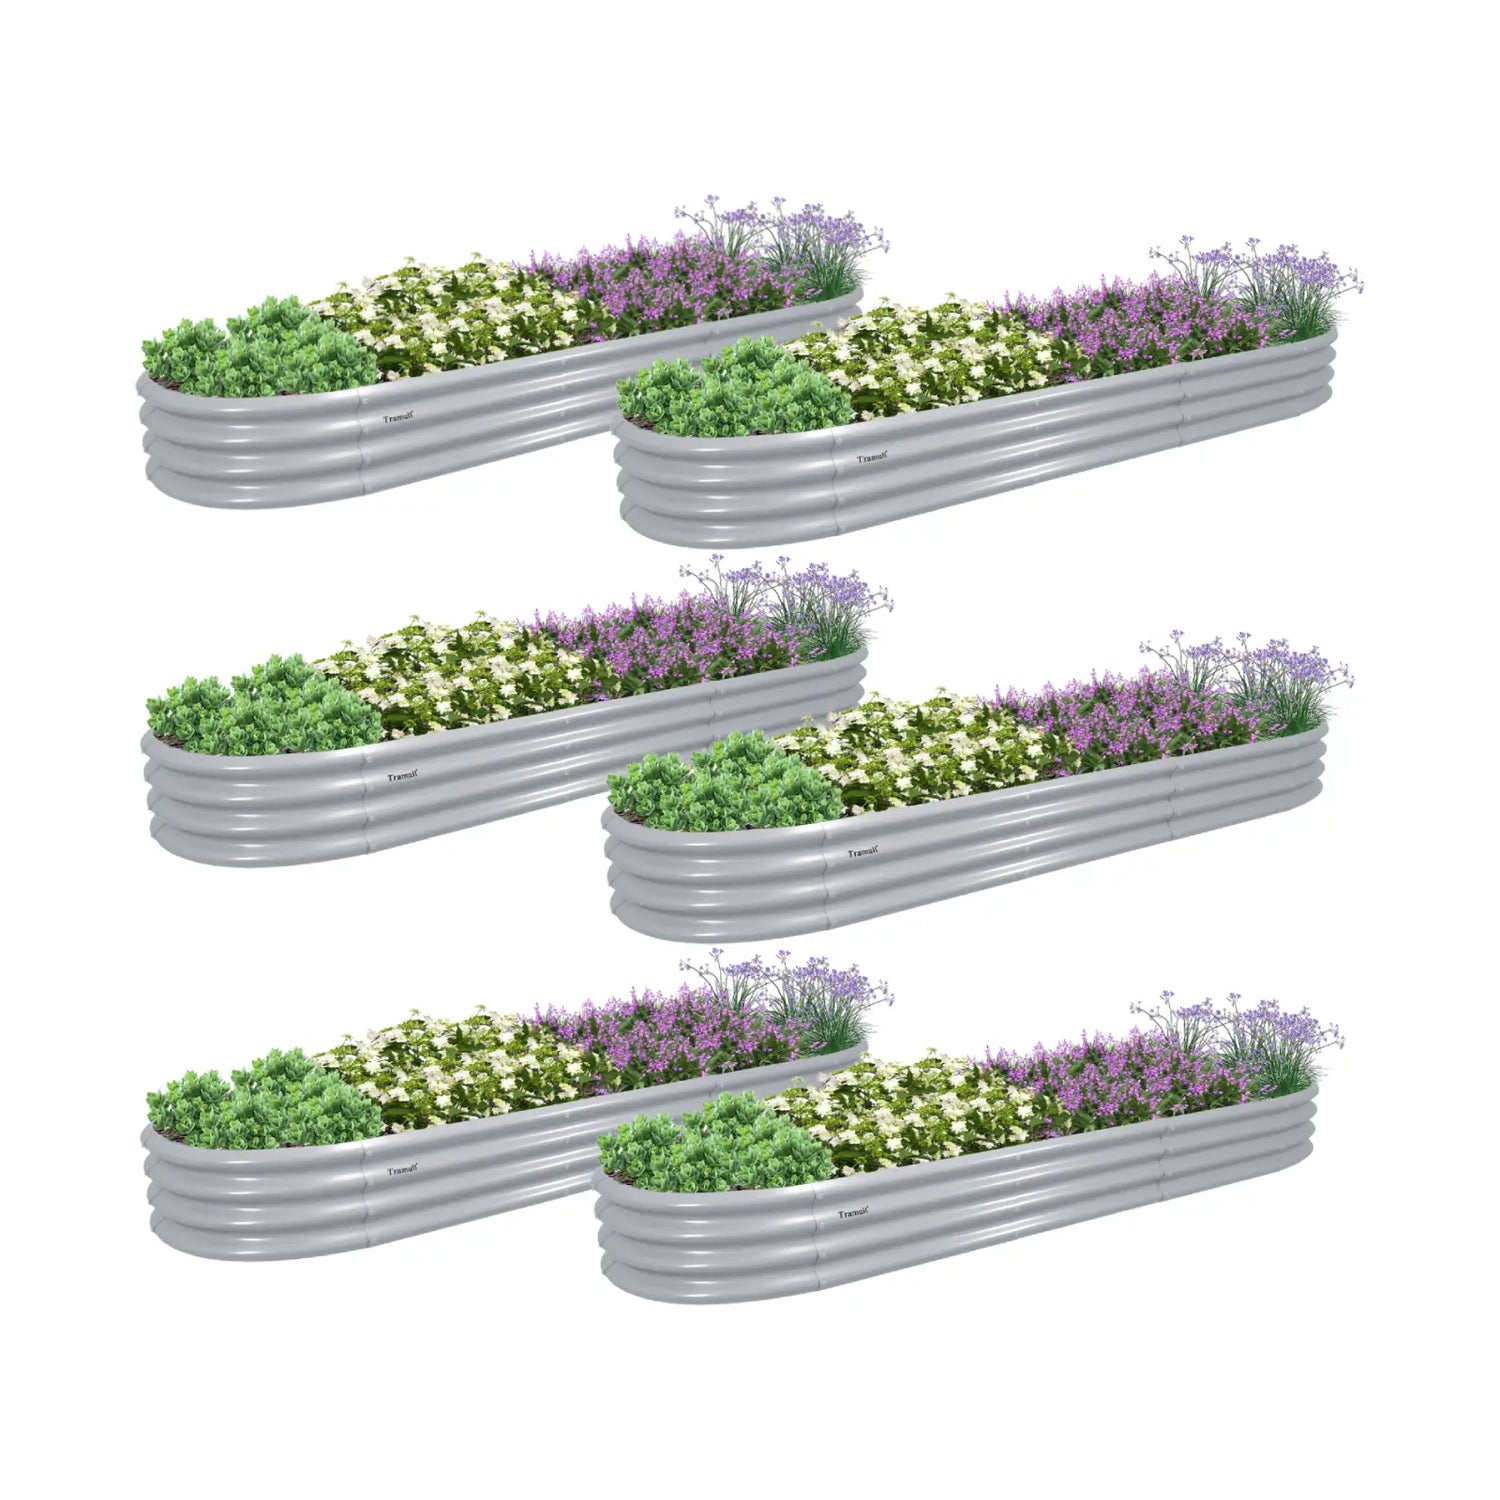 Bundle of 6 | 12" Tall 12x2ft Oval Metal Raised Garden Beds